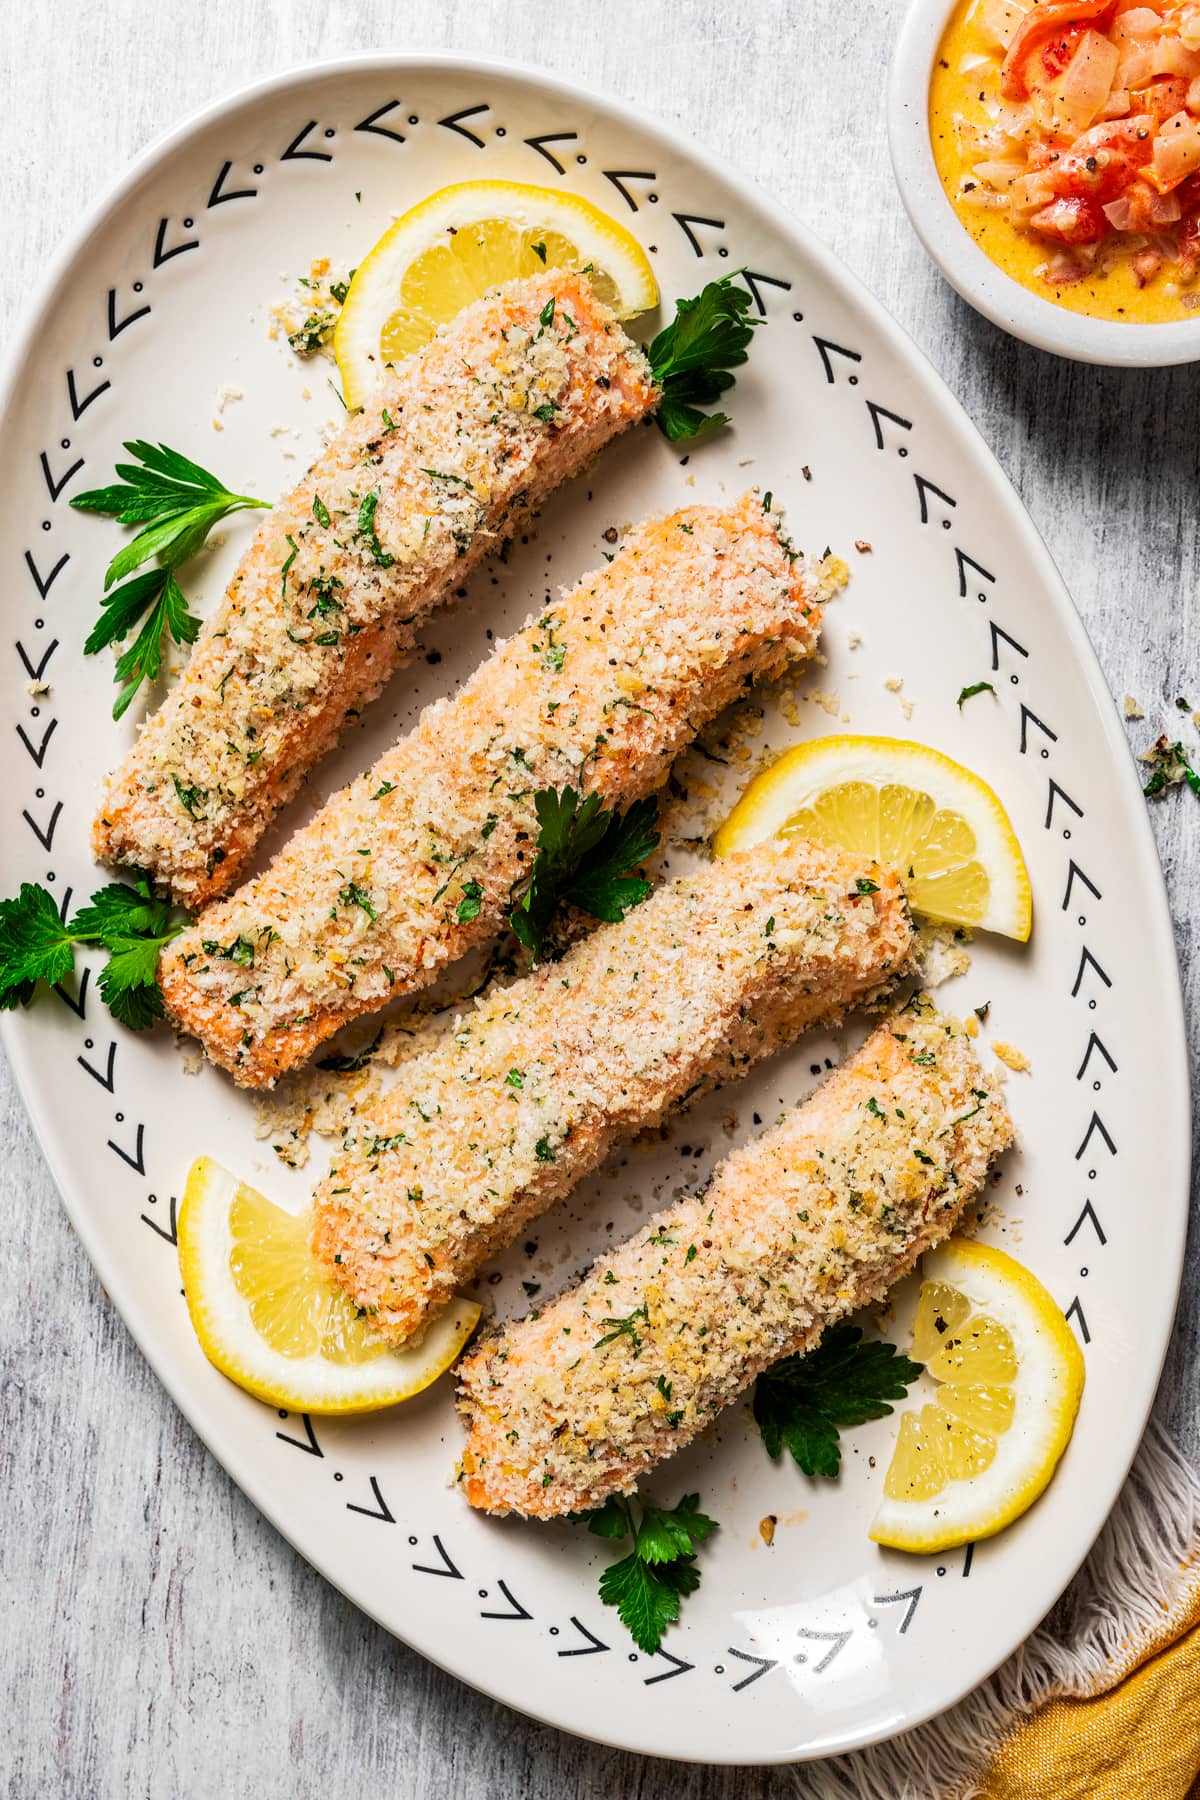 Four panko-crusted salmon filets on a platter garnished with parsley and lemon wedges.